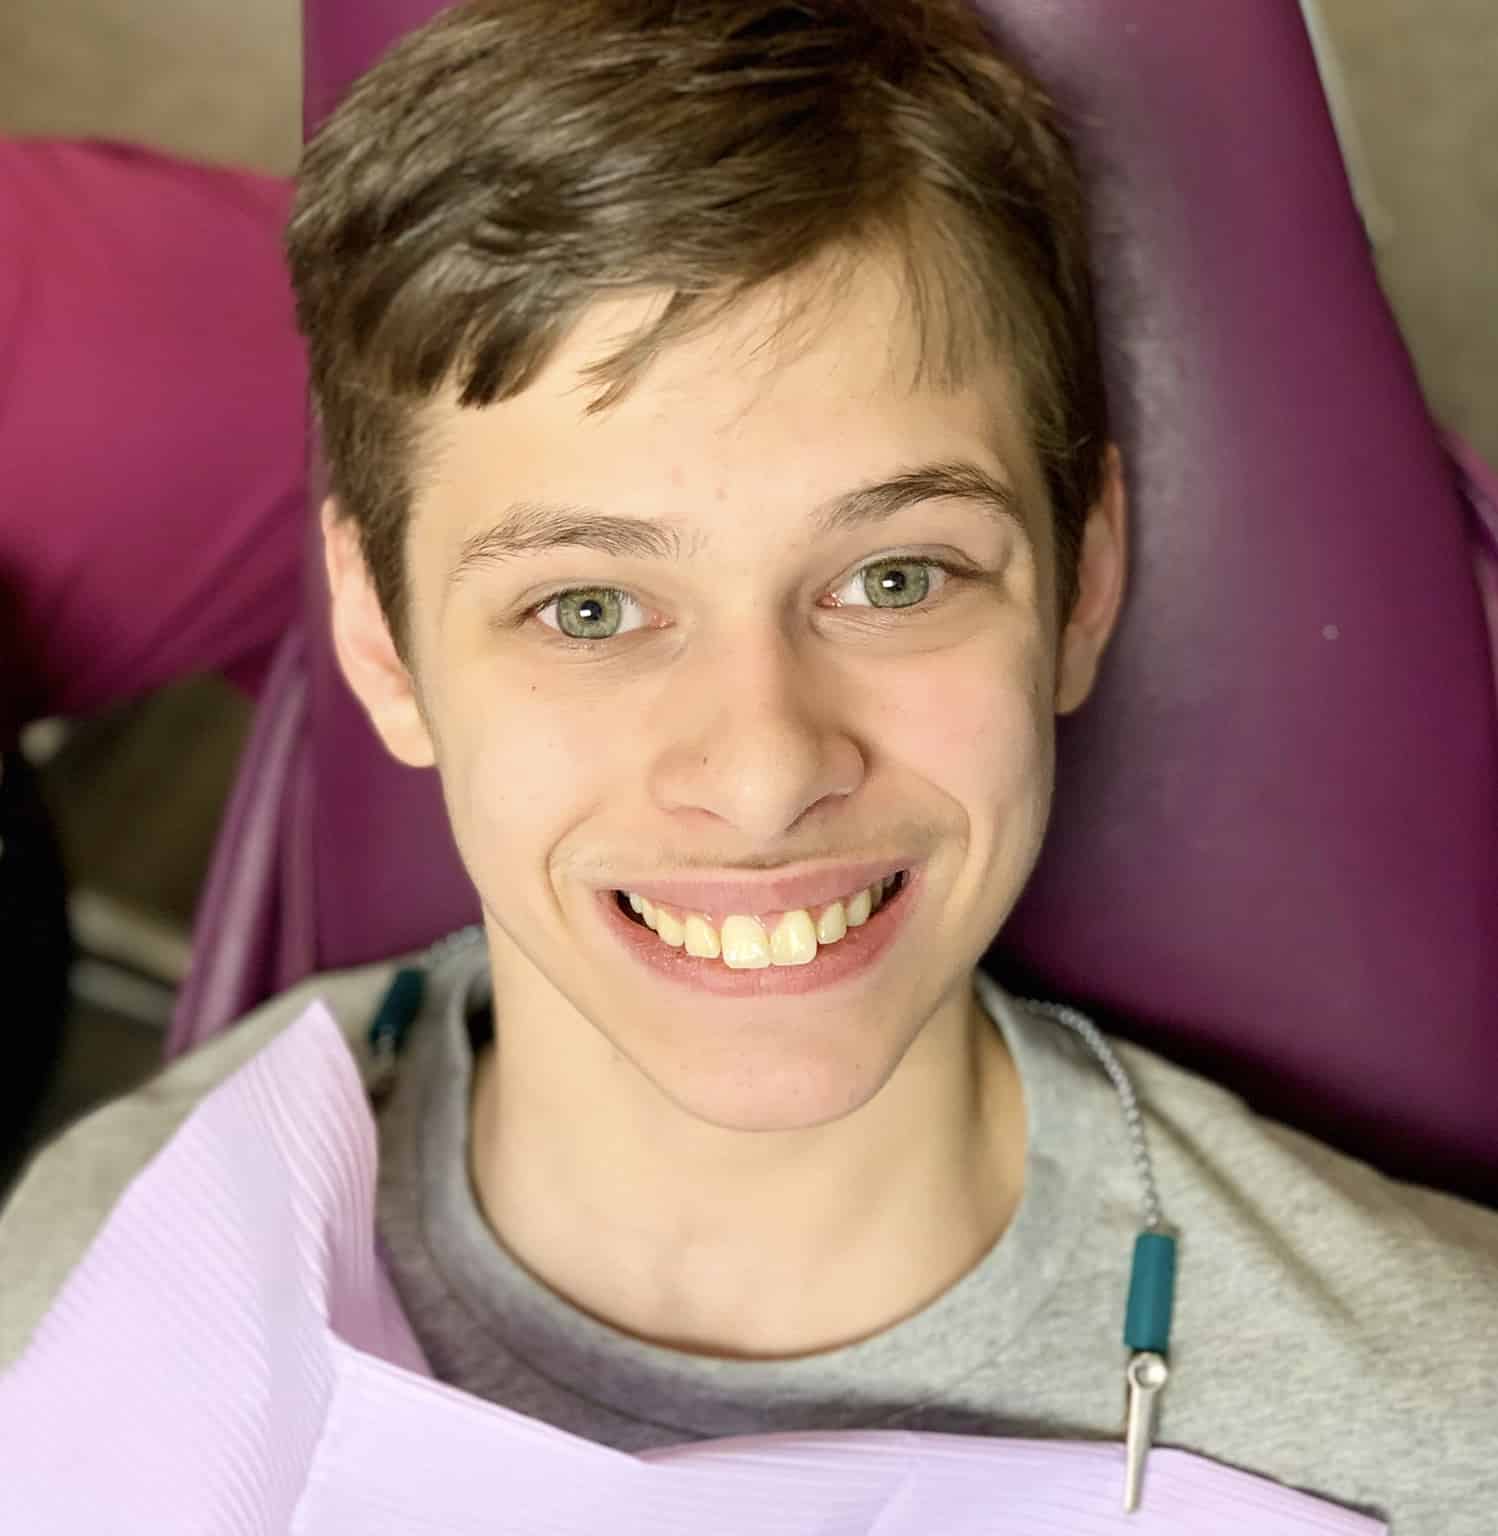 After the teeth are cleaned at the dentist - boy in chair